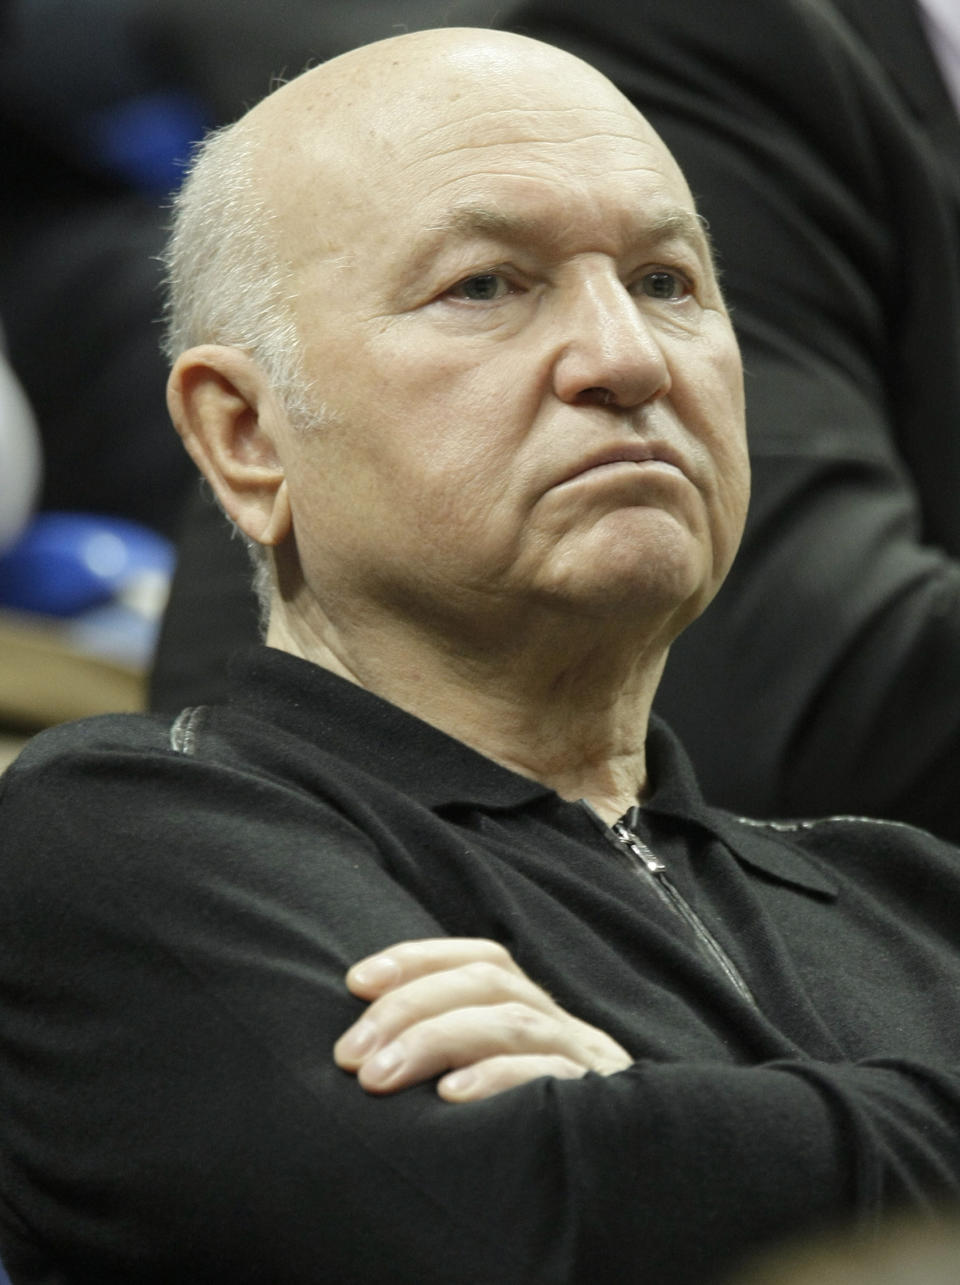 FILE - In this Sunday, April 17, 2011 file photo, former Moscow Mayor Yuri Luzhkov attends a Fed Cup World Group semifinal tennis match between Russia and Italy in Moscow, Russia. The former mayor of Moscow and one of the founders of Russia's ruling United Russia party, Yuri Luzhkov, has died at the age of 83. Russia's Ren TV channel reported Tuesday Dec. 10, 2019, that Luzhkov died in Munich, where he was undergoing heart surgery. (AP Photo/Misha Japaridze, File)